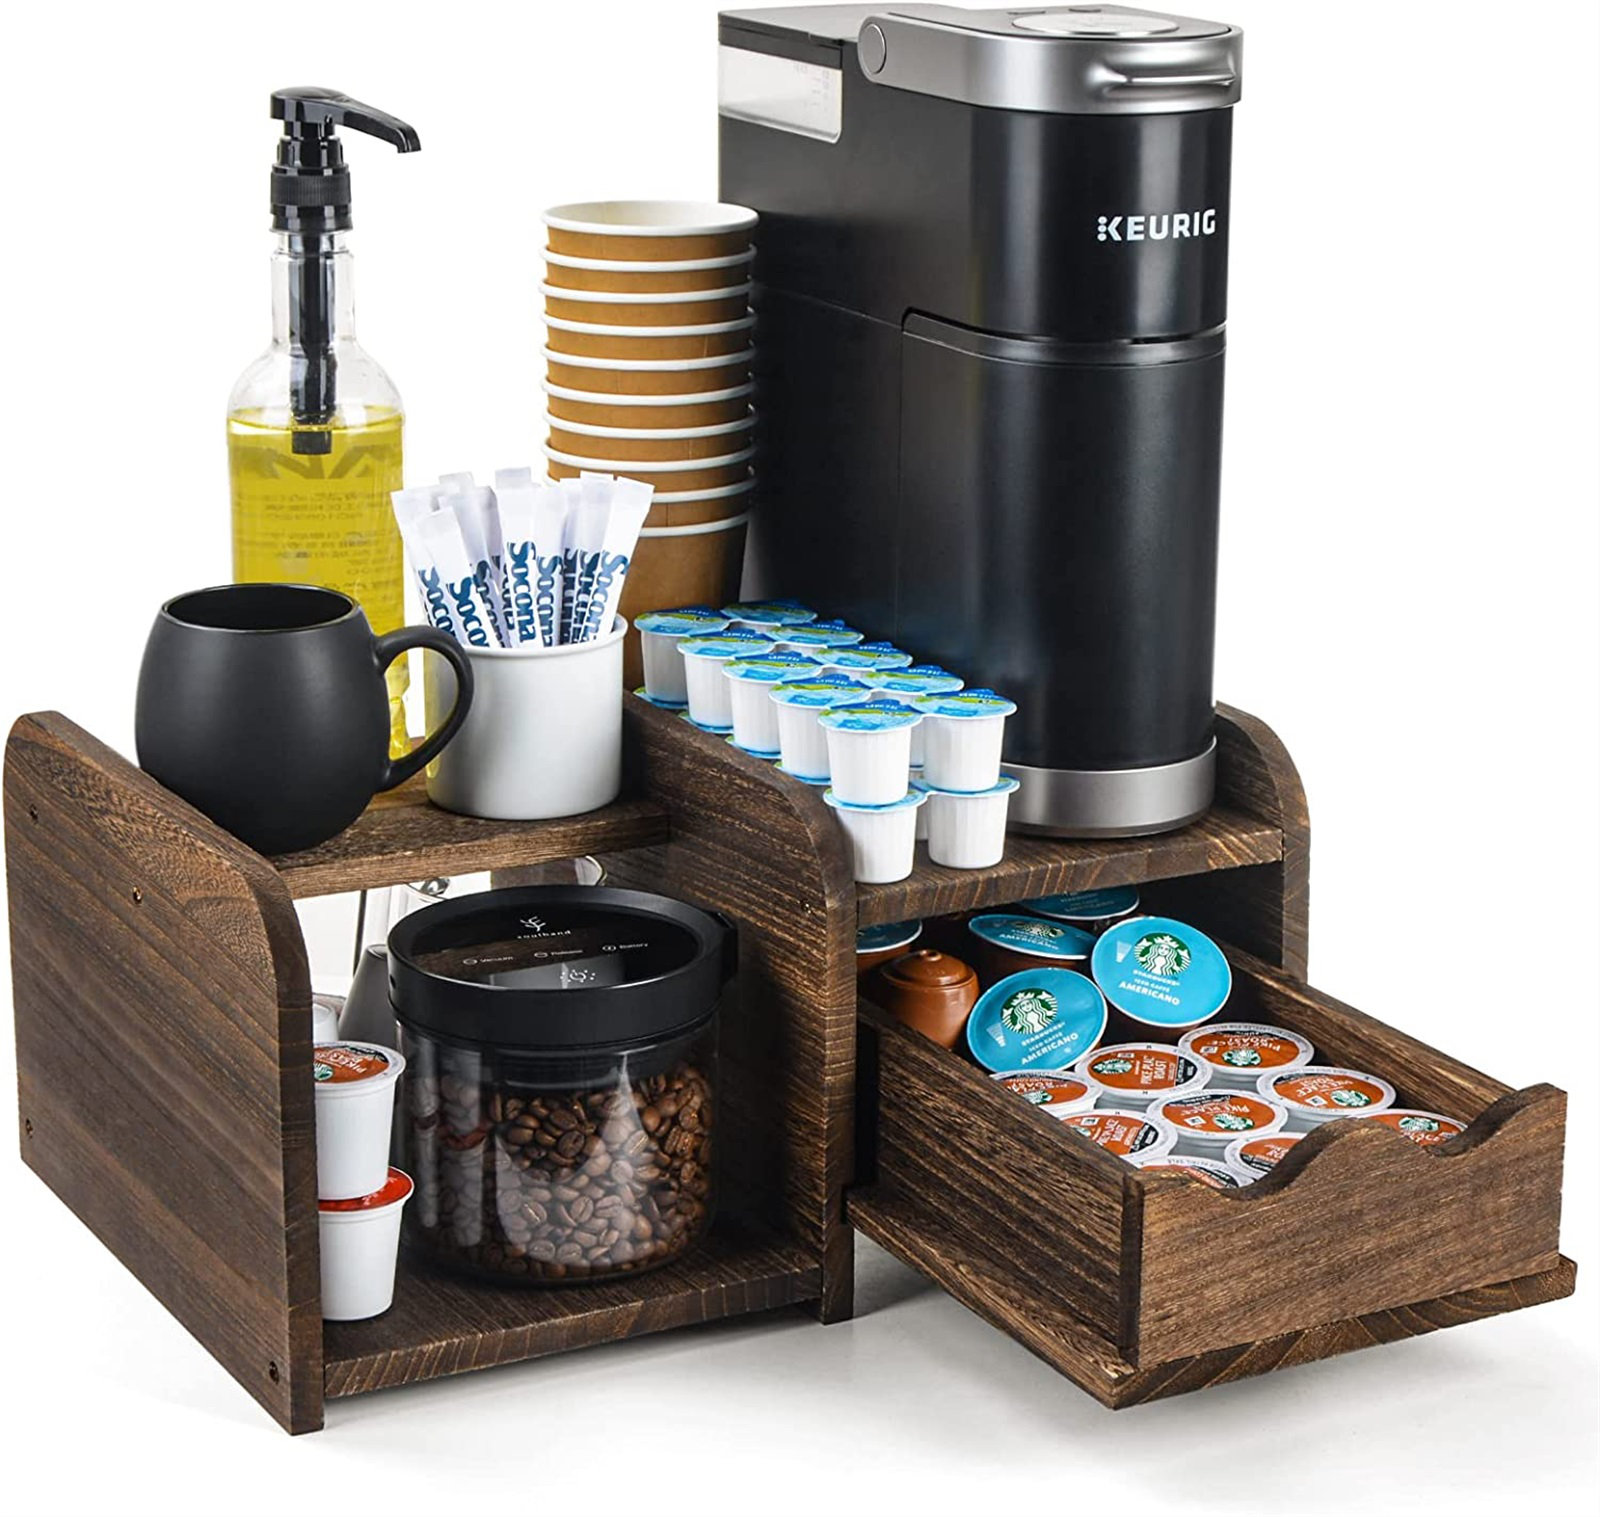 Ron Trading Oulhand Coffee Station Organizer With Drawer, Wooden Coffee